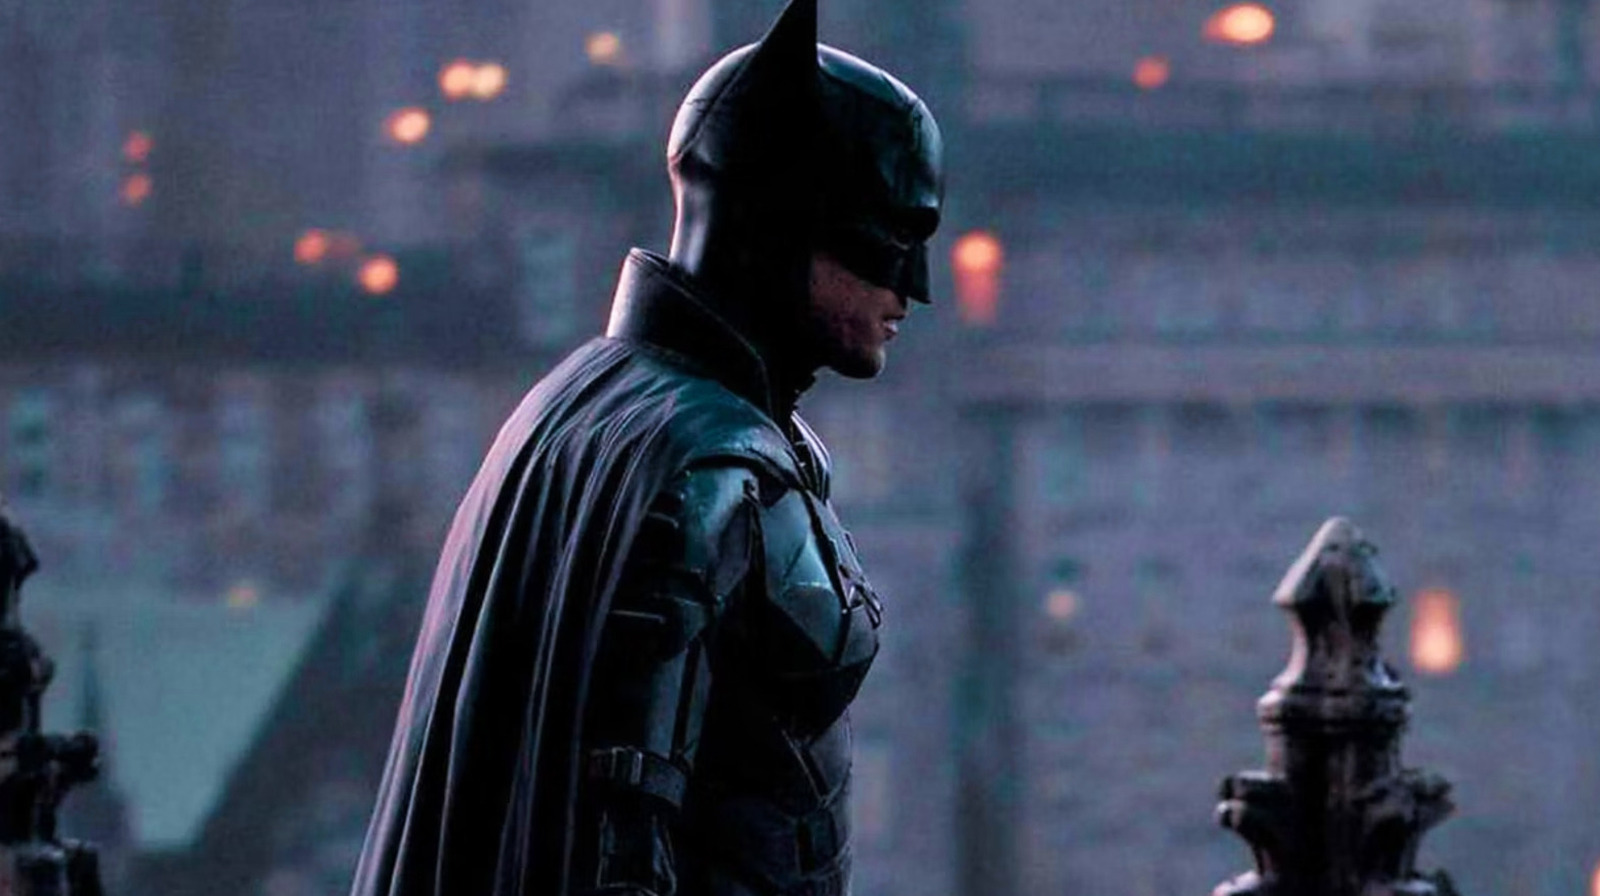 The Batman's Badass Hallway Scene Was More Real Than You Think